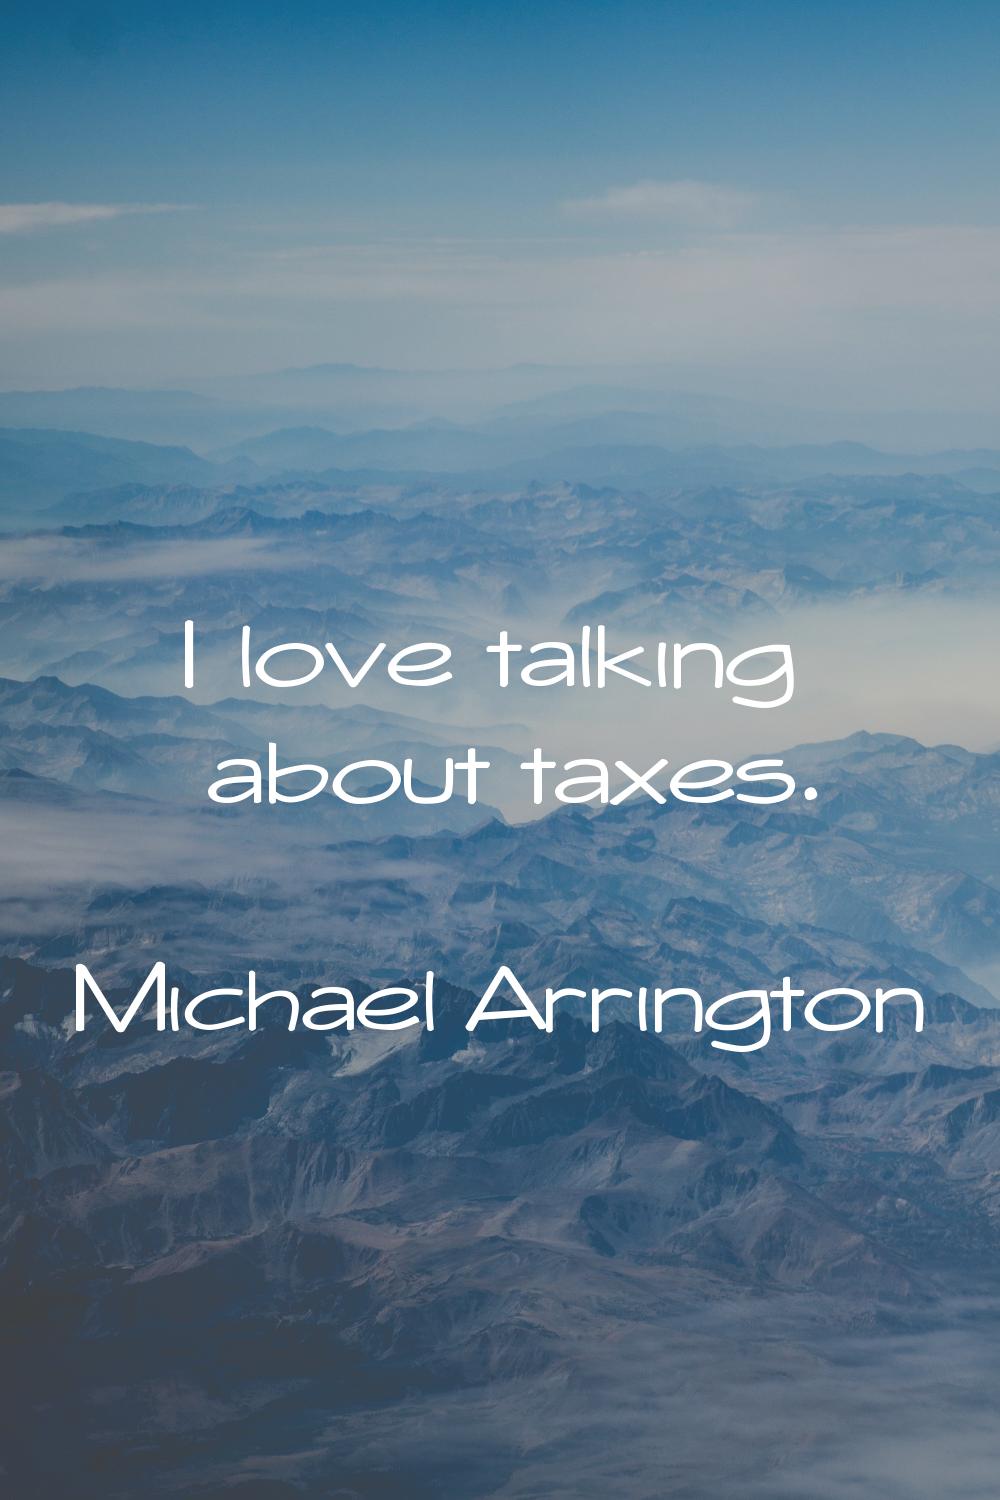 I love talking about taxes.